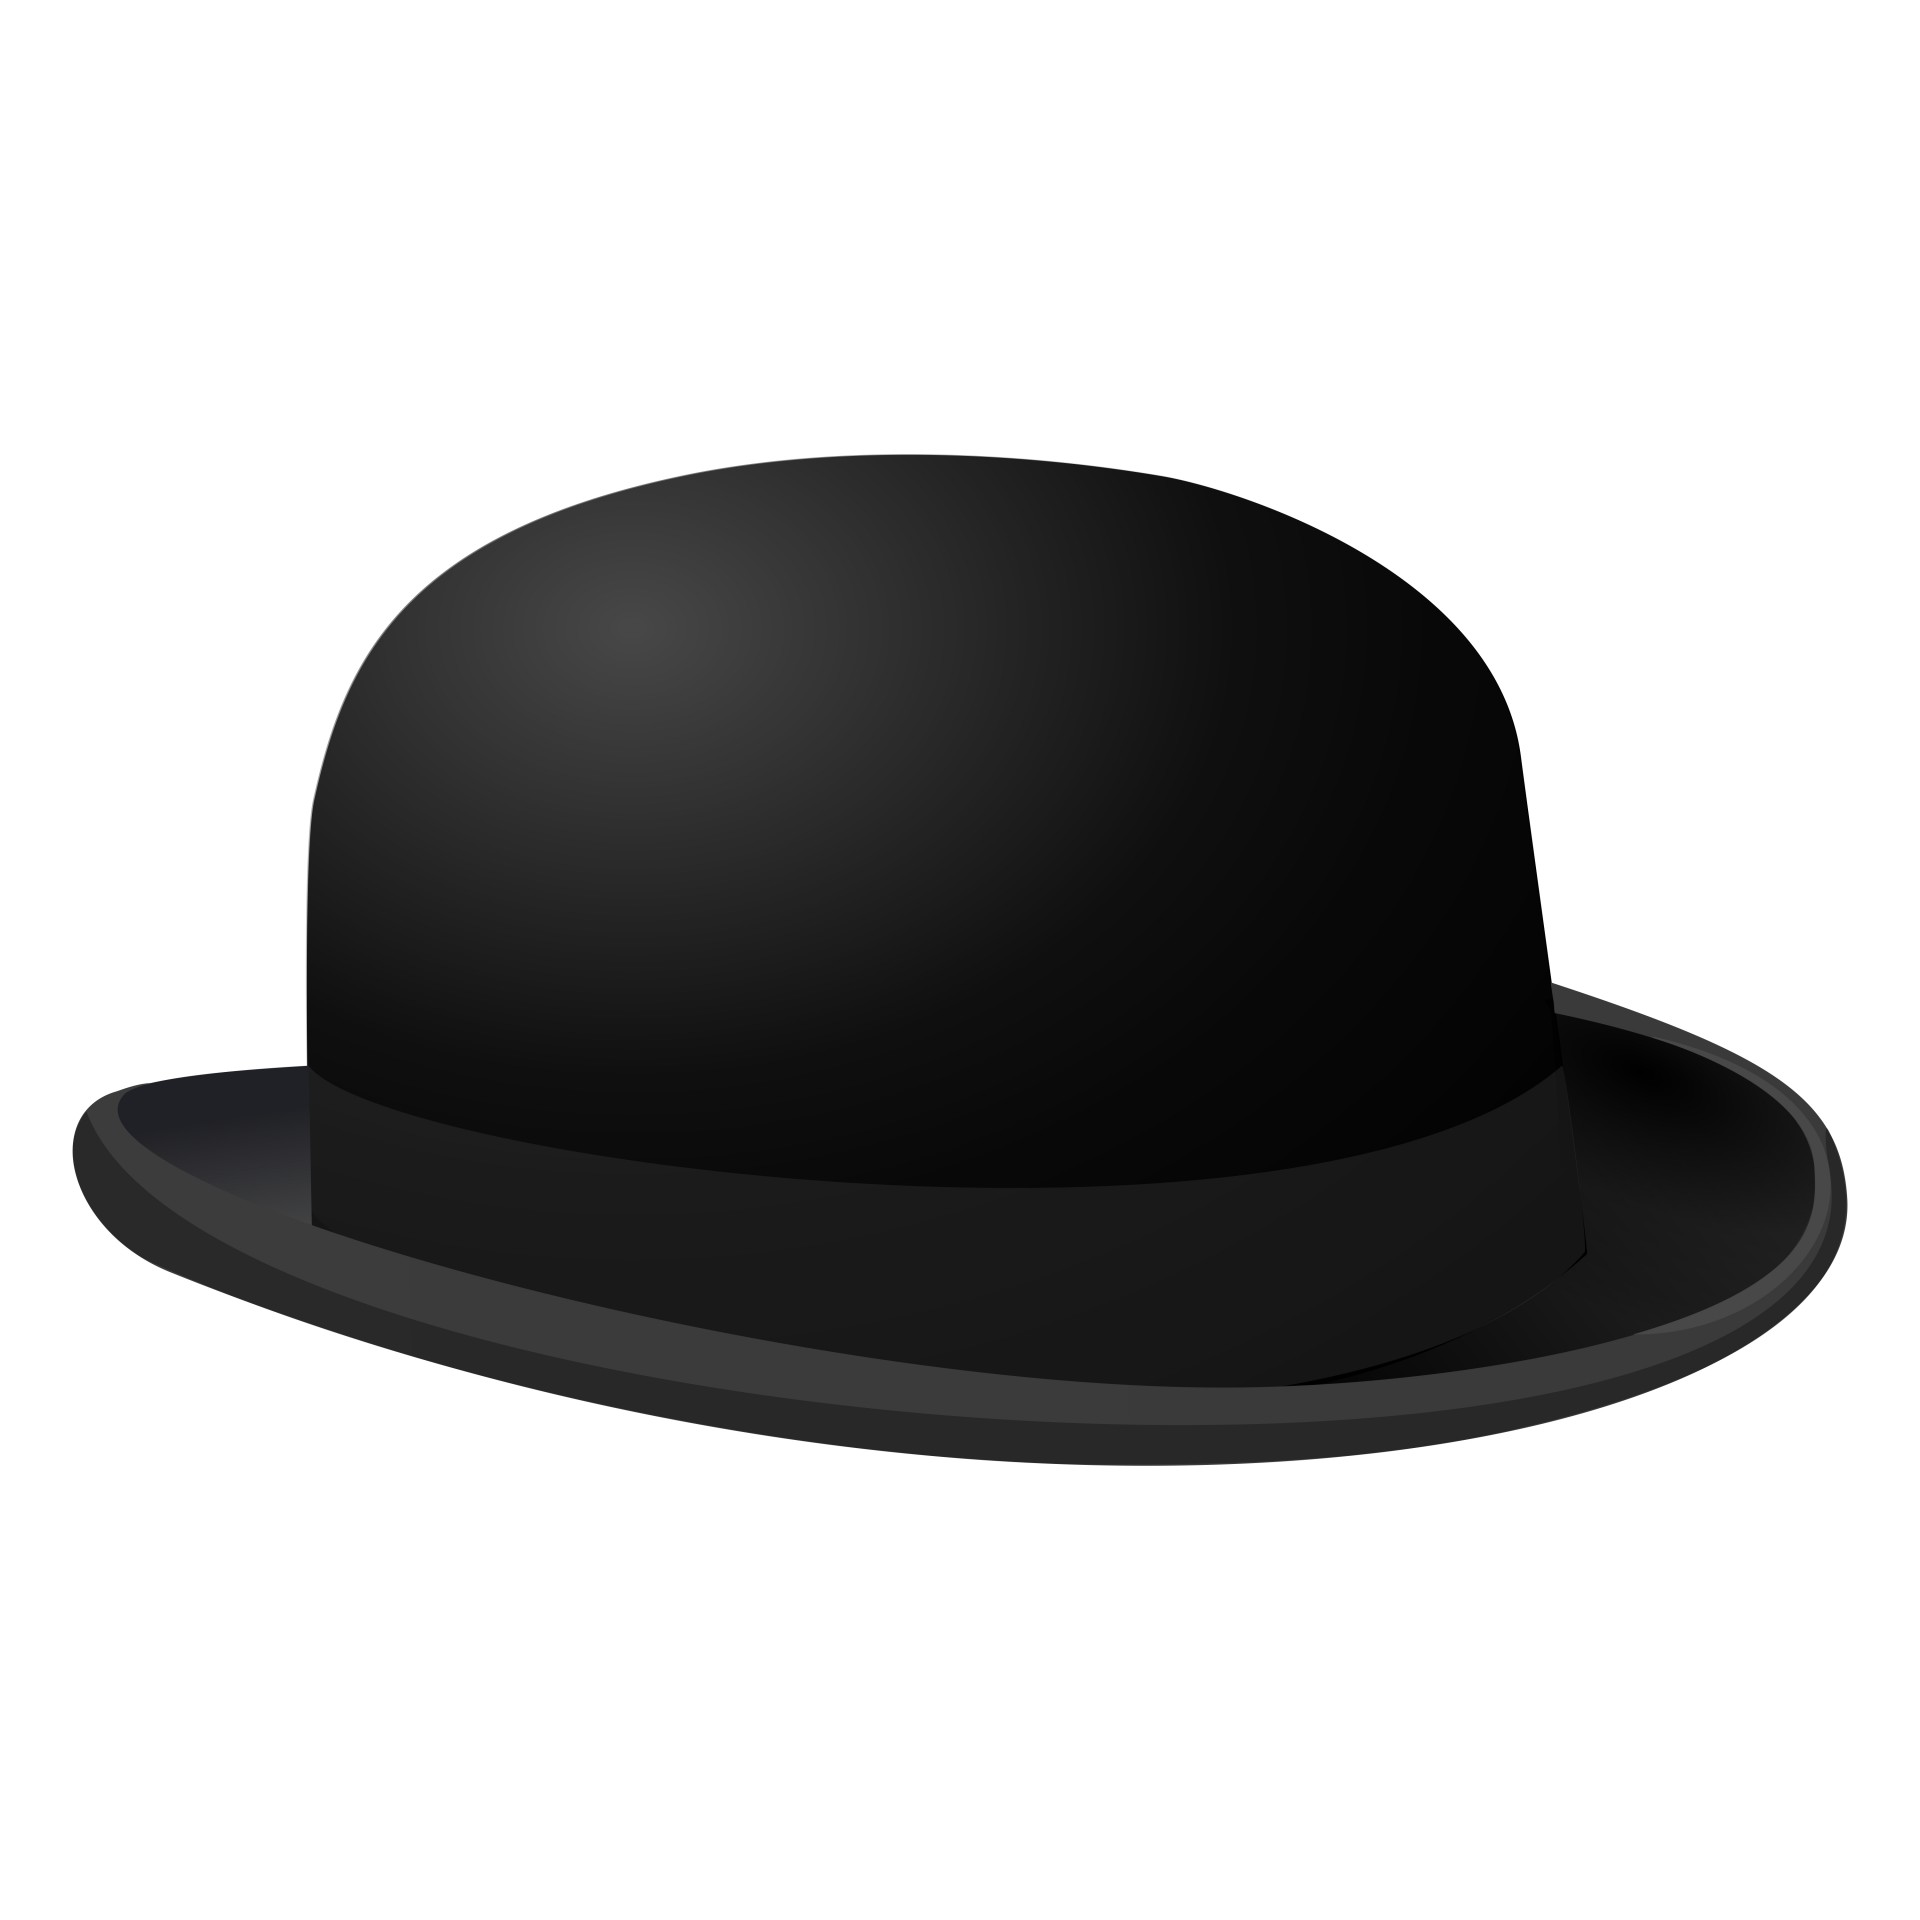 Silhouette Symbol Of Bowler Hat Free Stock Photo